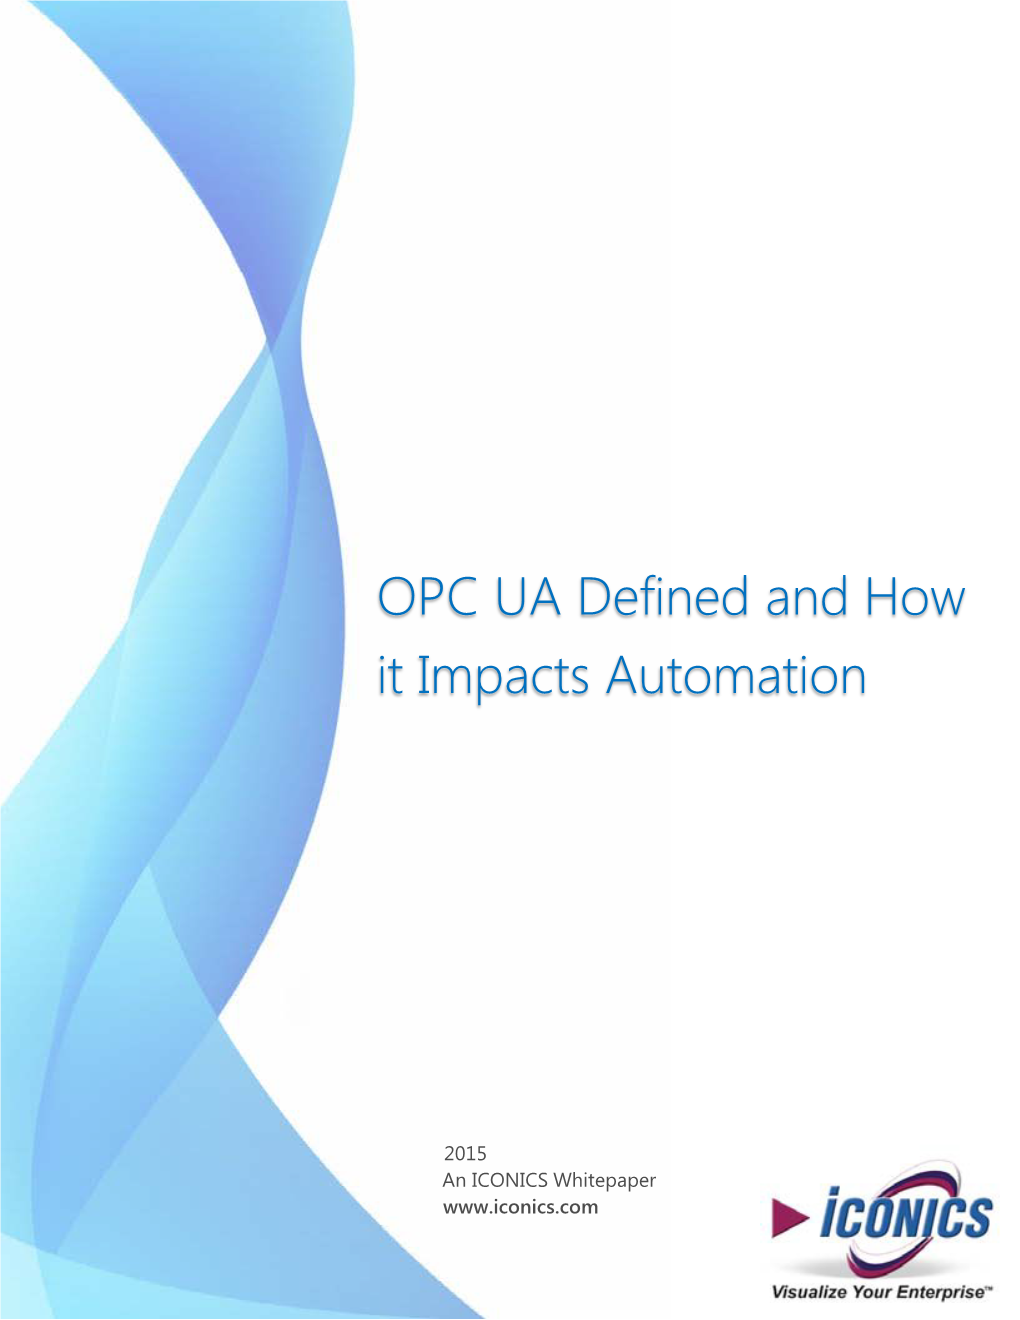 OPC UA Defined and How It Impacts Automation